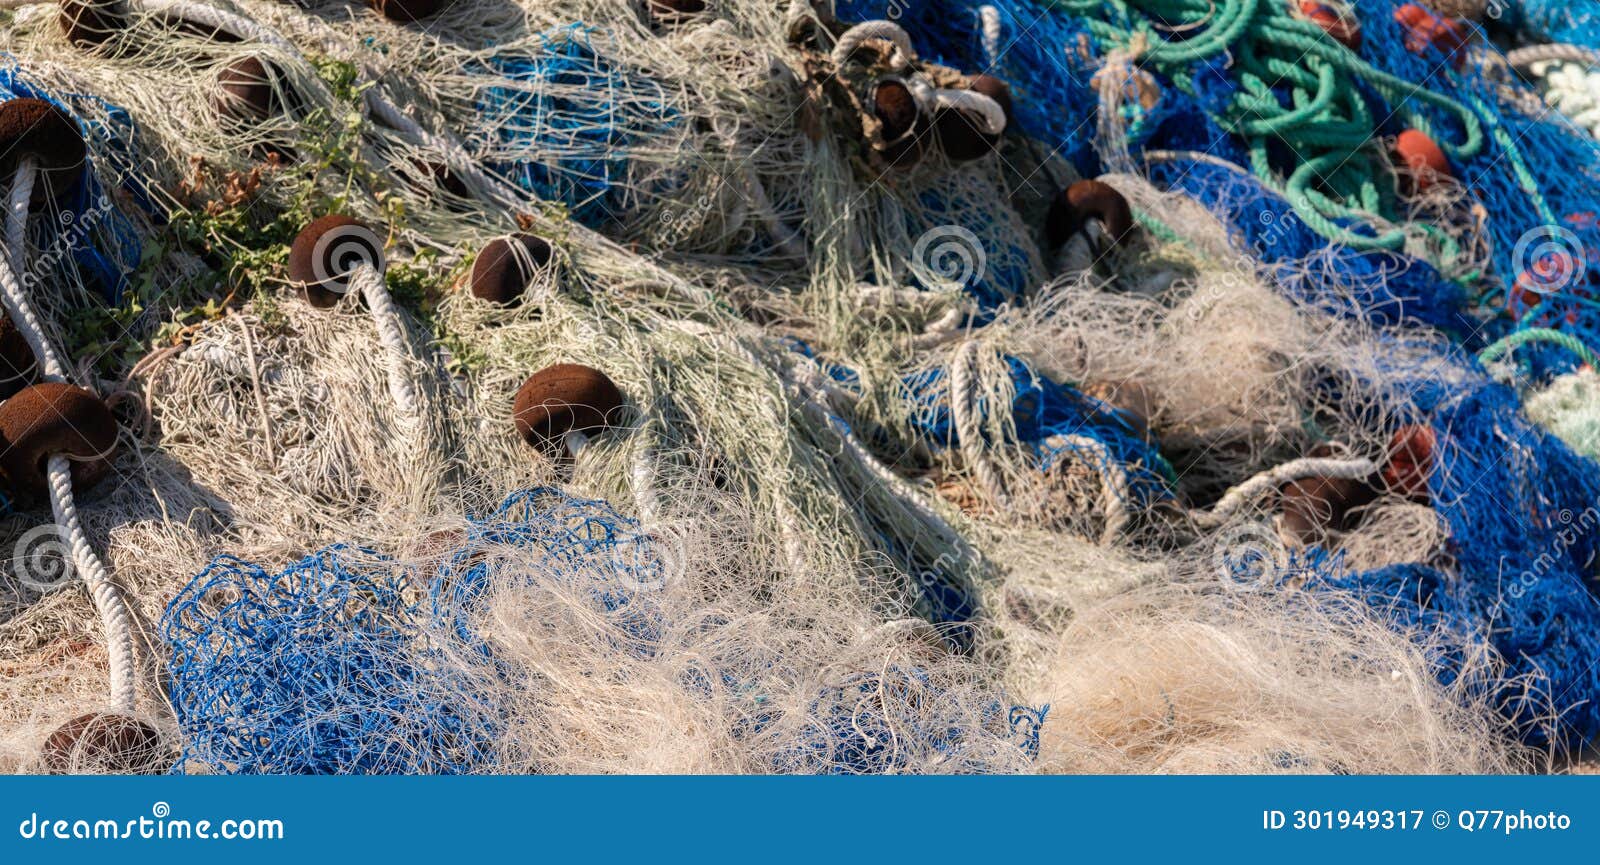 Industrial Fishing Equipment Fishnets and Fishing Lines Lying on Concrete  in the Port Stock Image - Image of line, harbor: 301949317